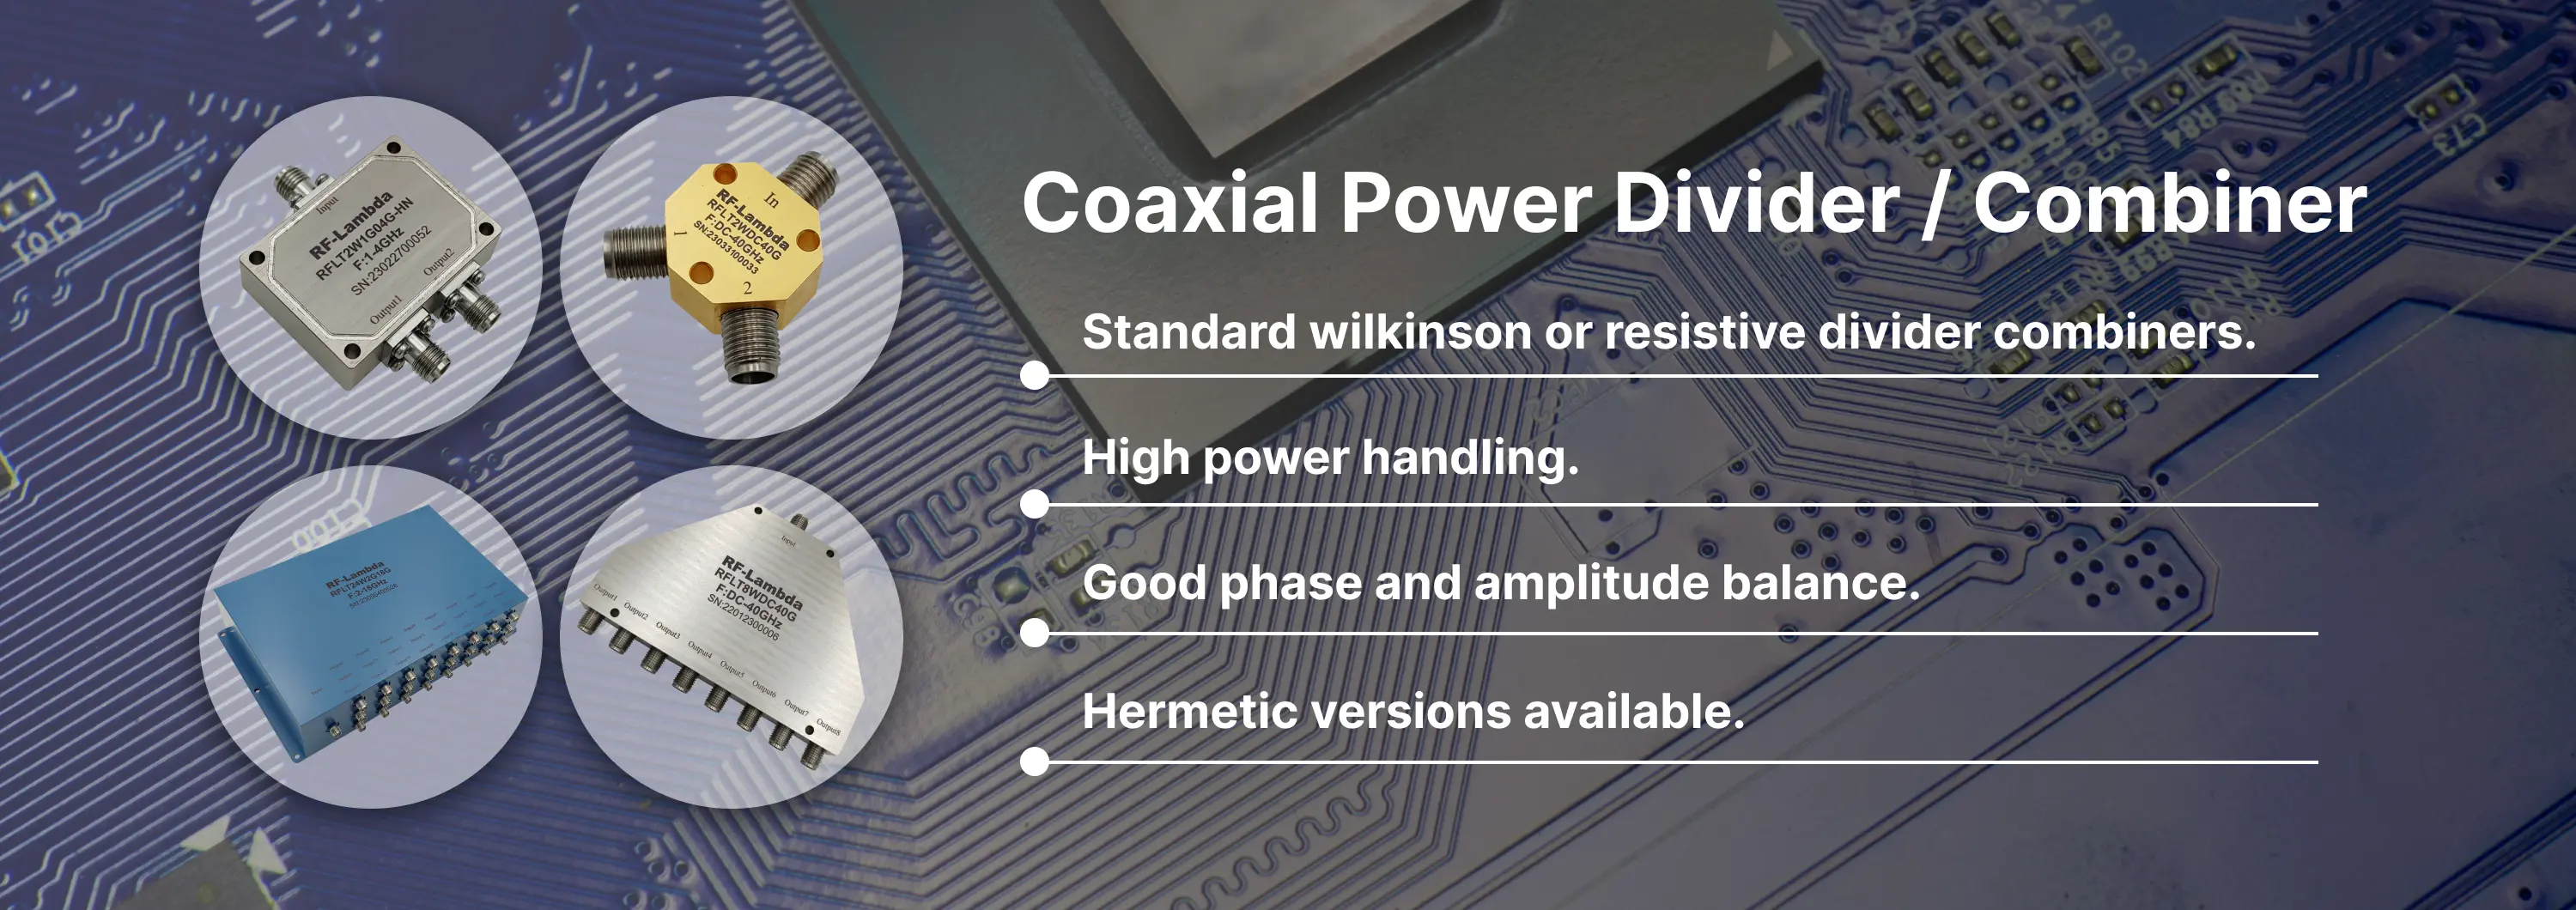 Coaxial Power Divider / Combiner Banner